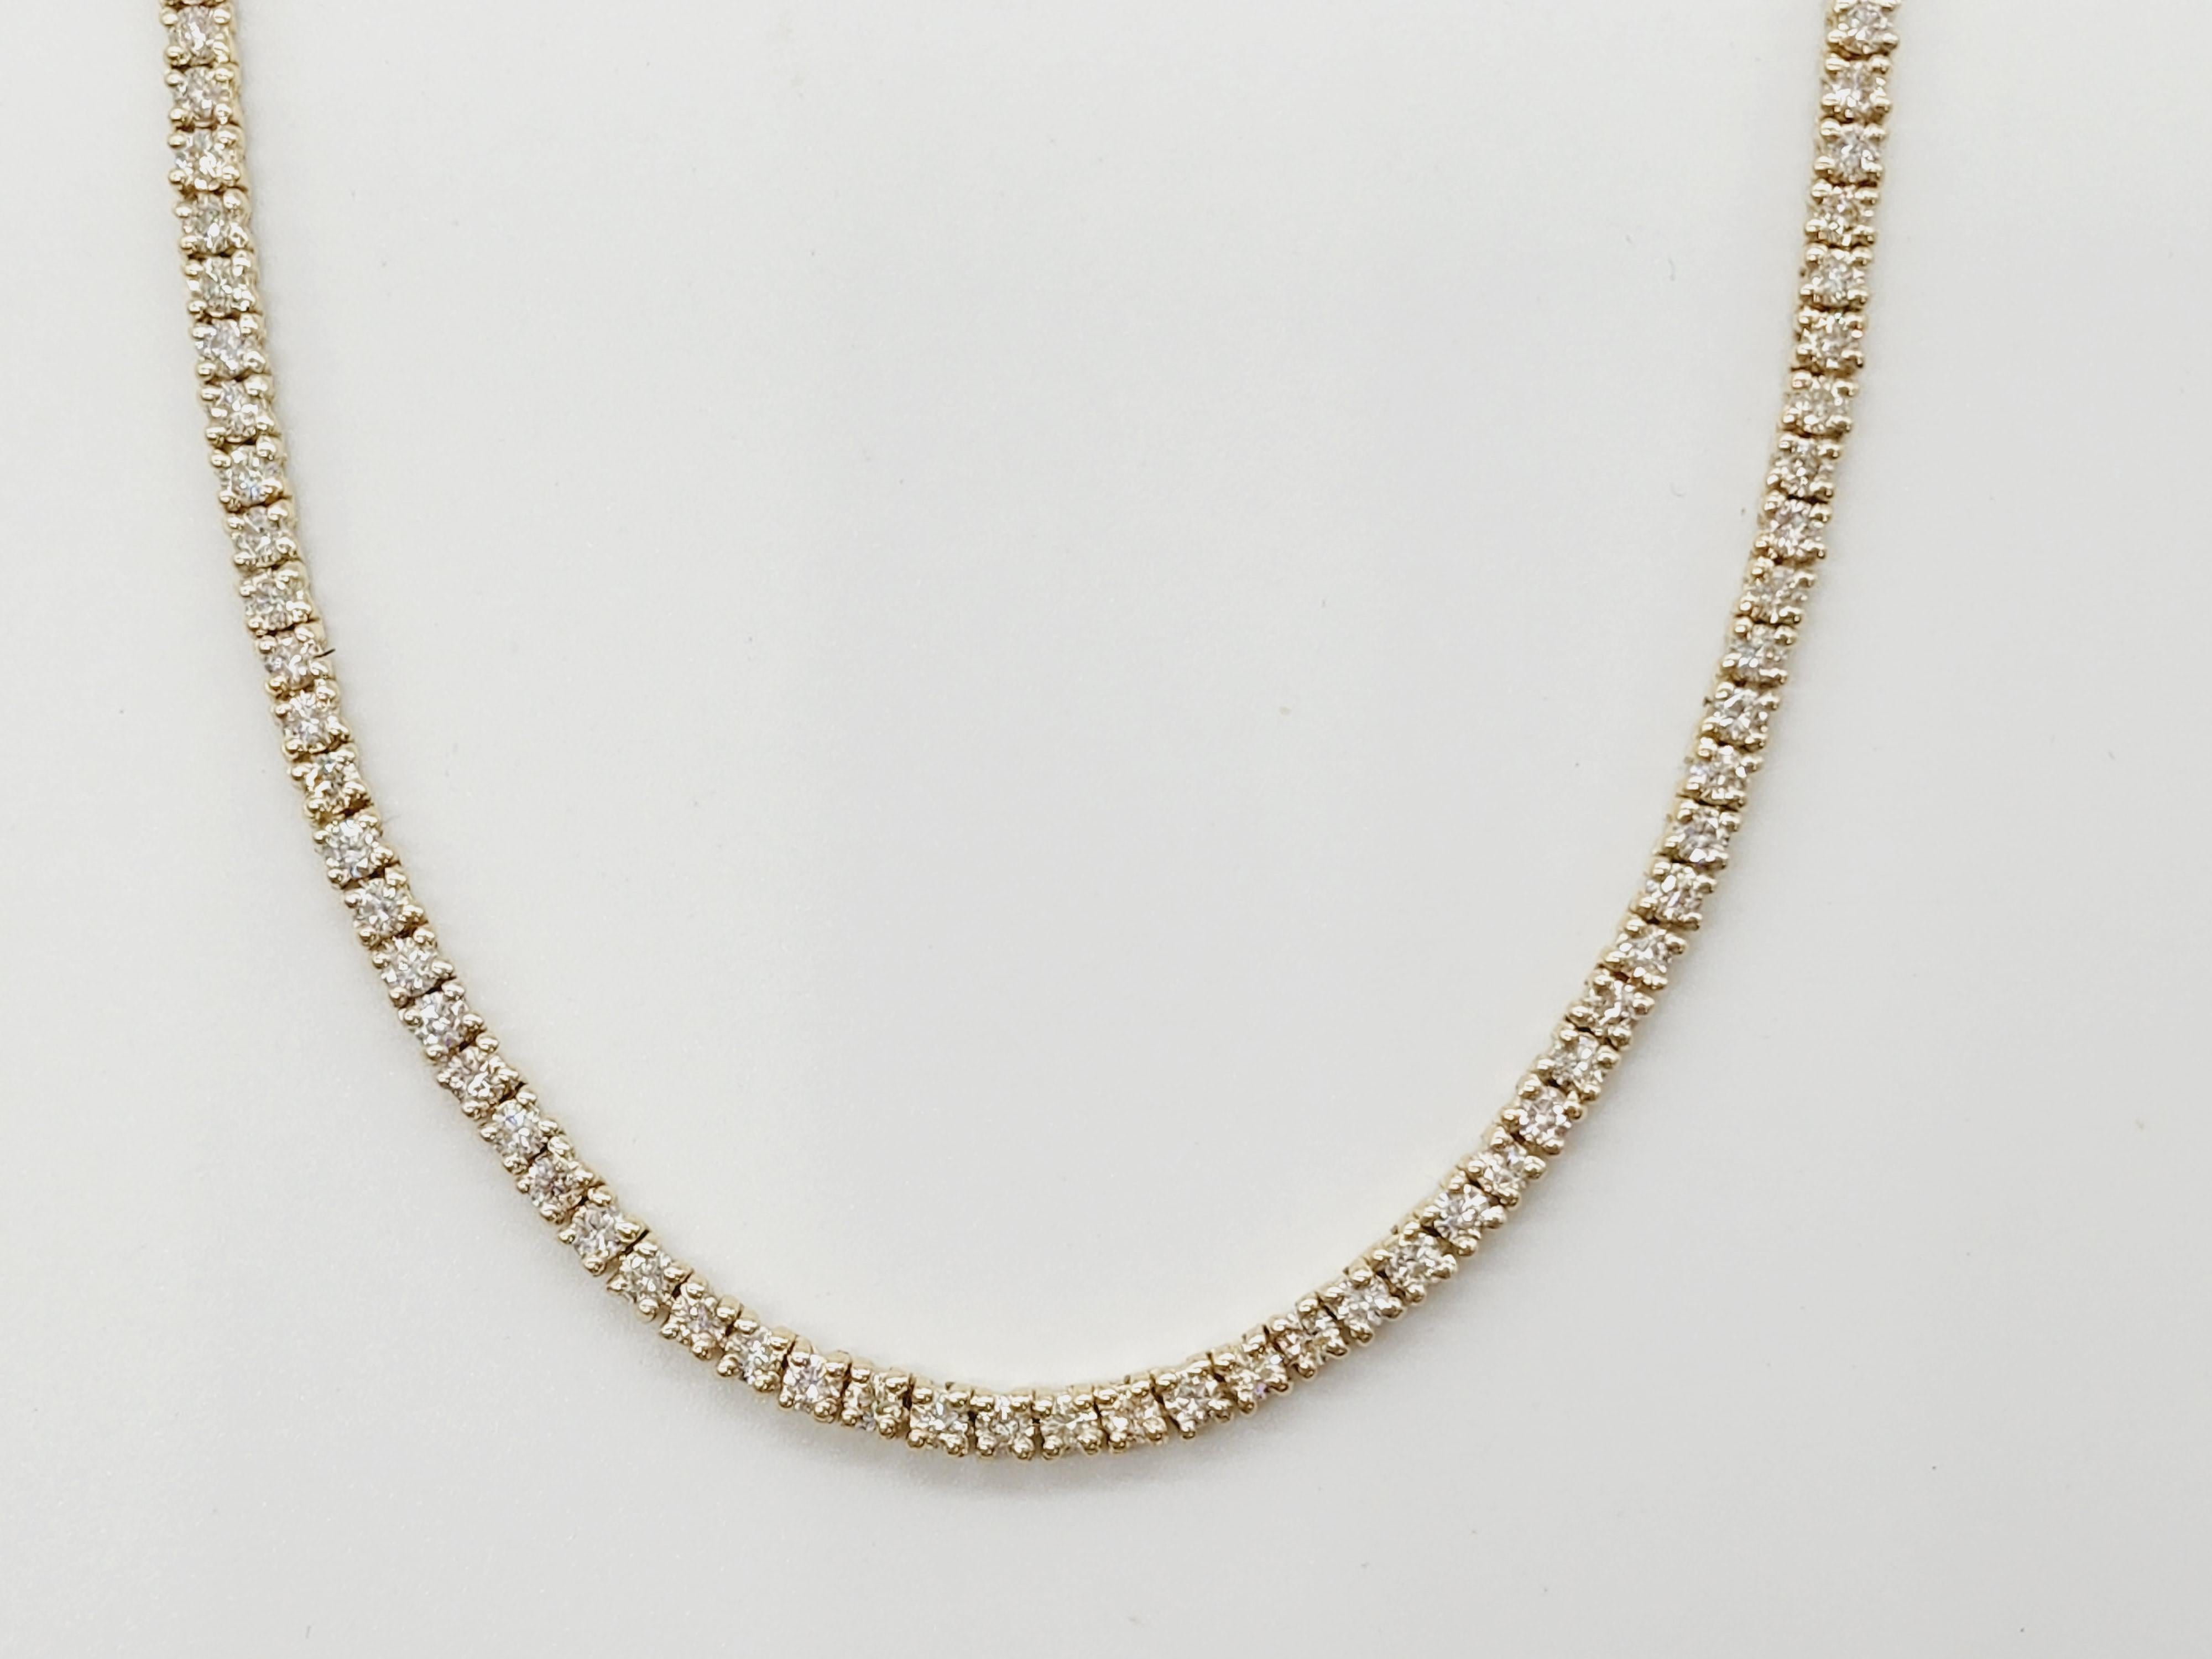 Brilliant and beautiful tennis necklace, natural round-brilliant cut white diamonds clean and Excellent shine. 
14k yellow gold classic four-prong style for maximum light brilliance.
18 inch length. Average H Color, VS Clarity.